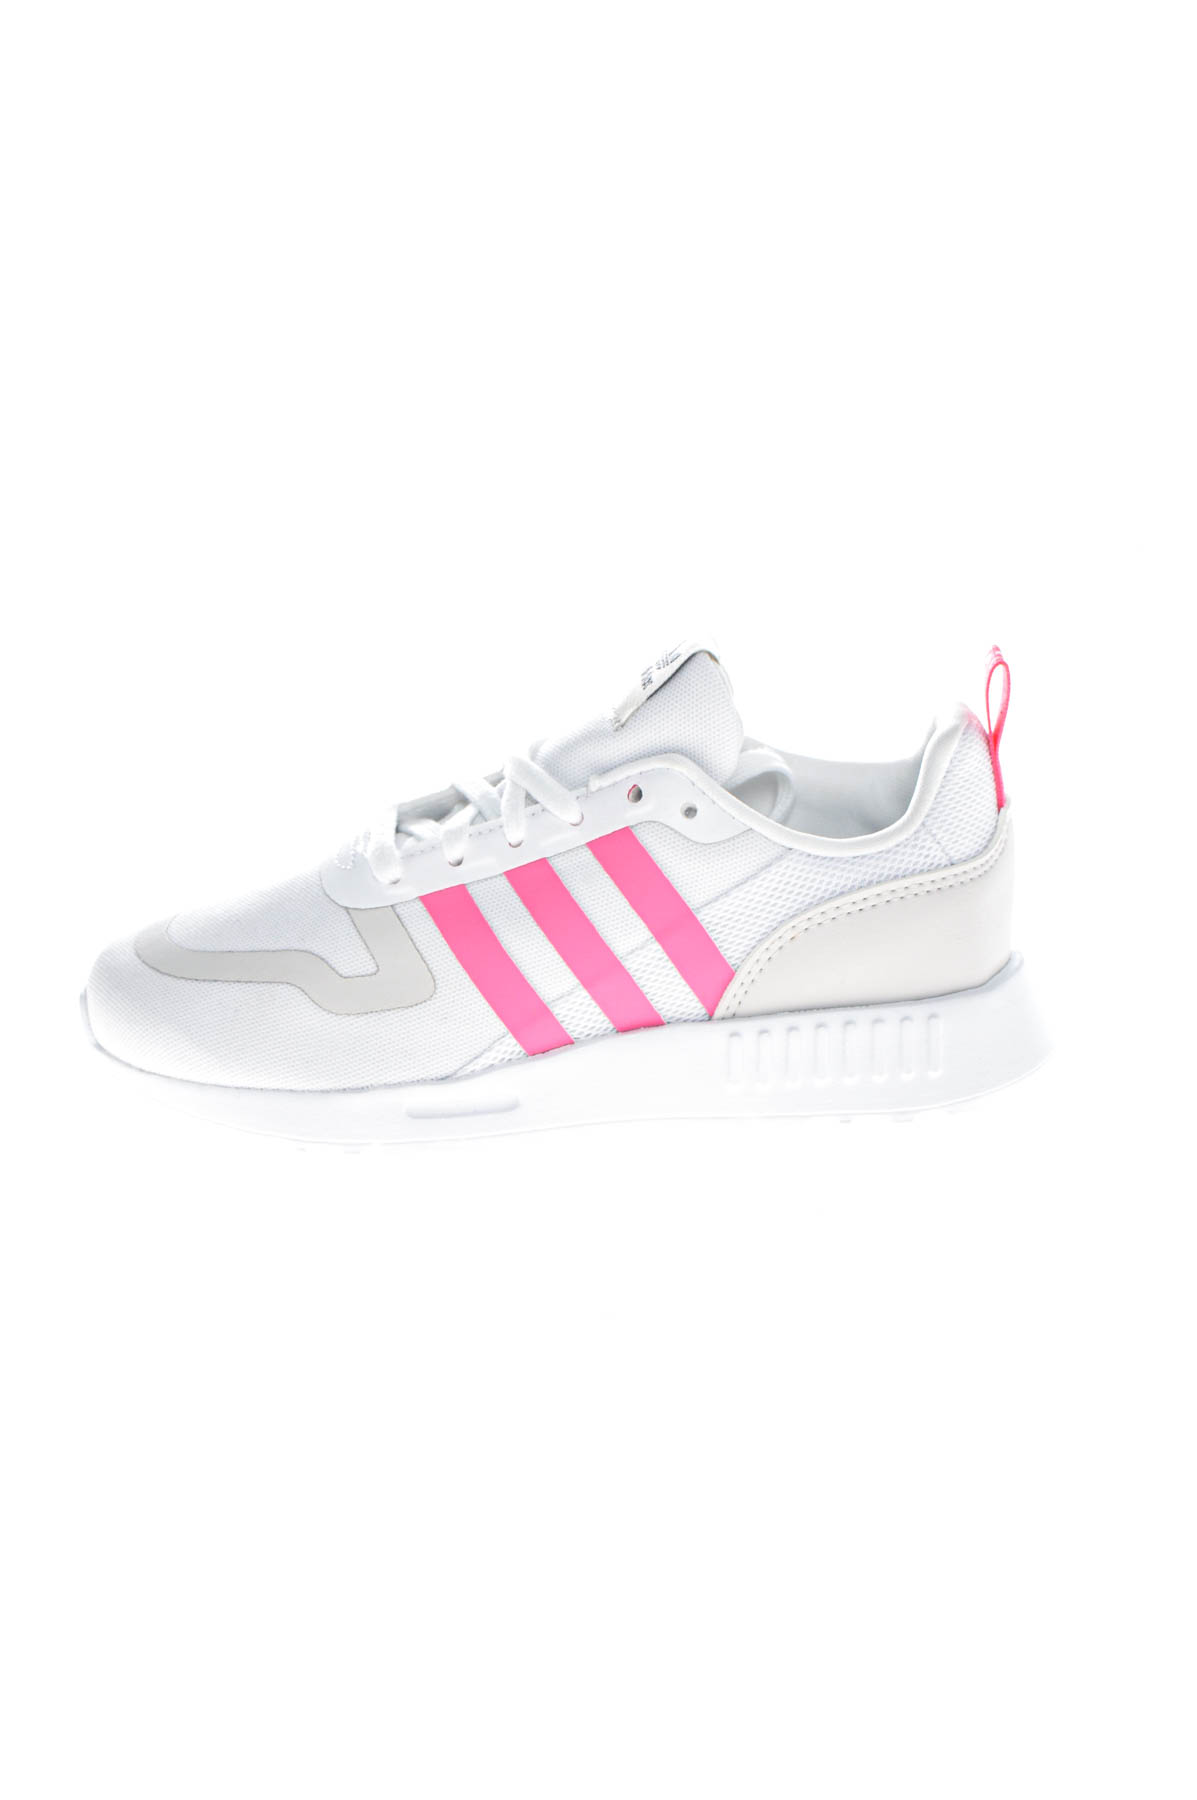 Girl's shoes - Adidas - 0